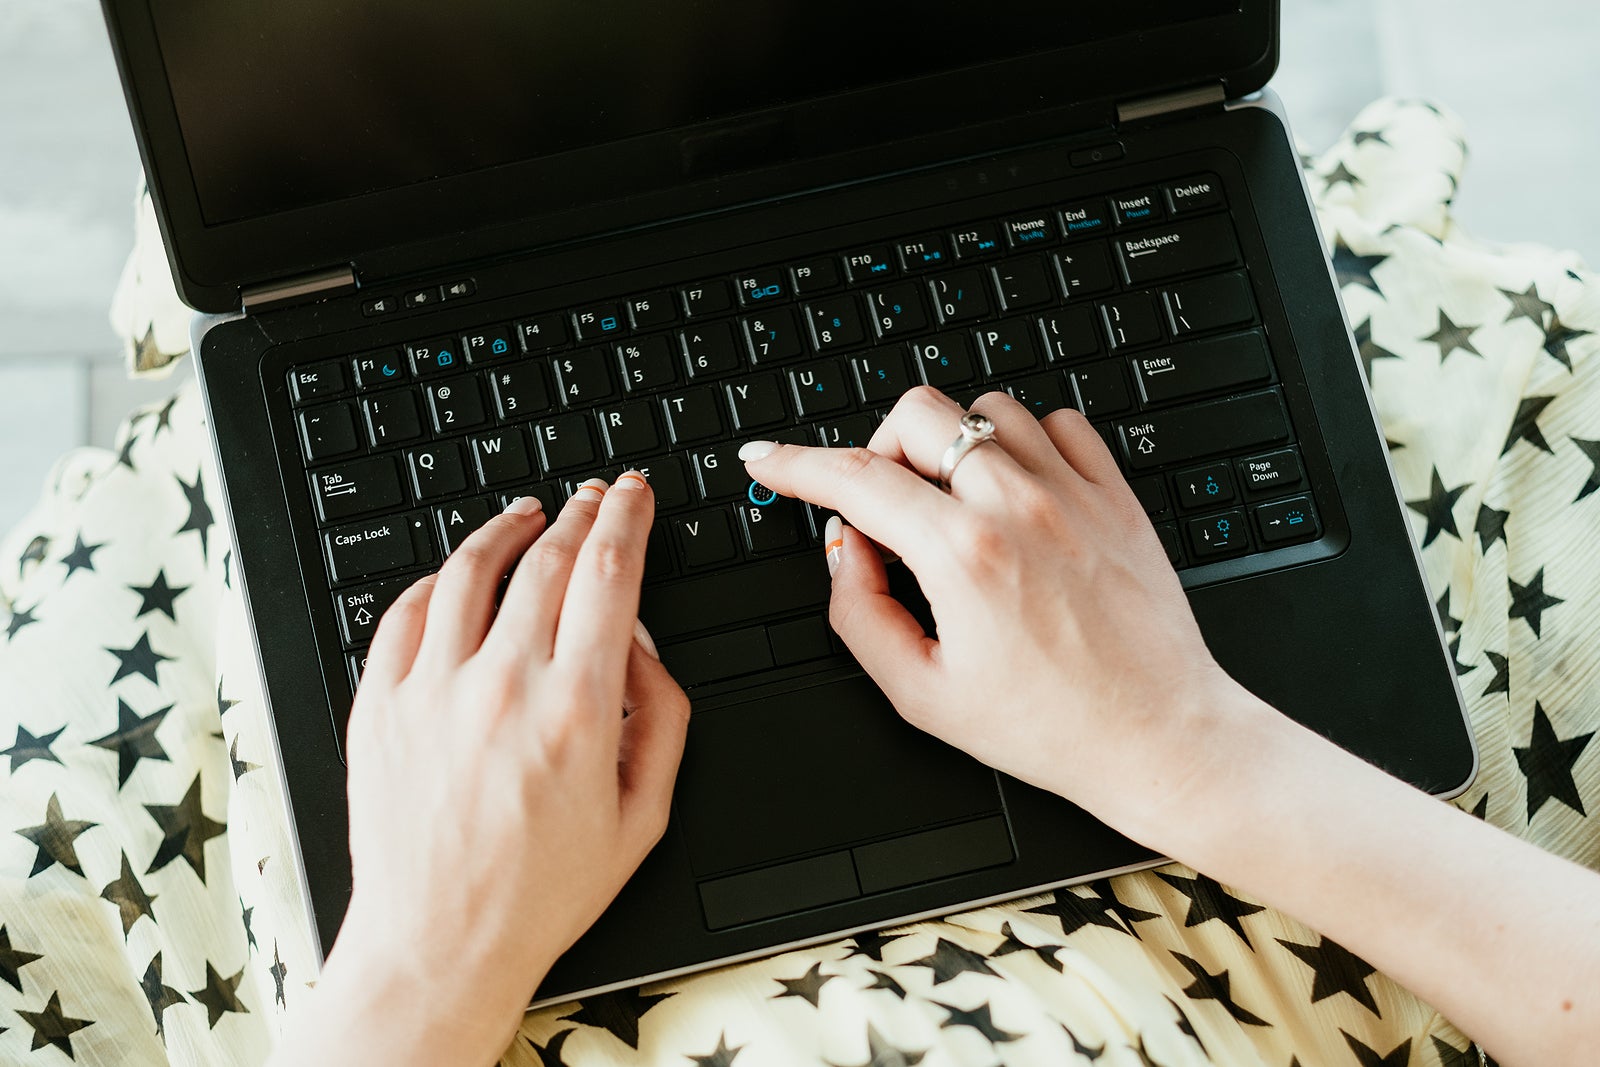 data entry freelance job. remote working and earning money online. woman hands typing on the laptop.